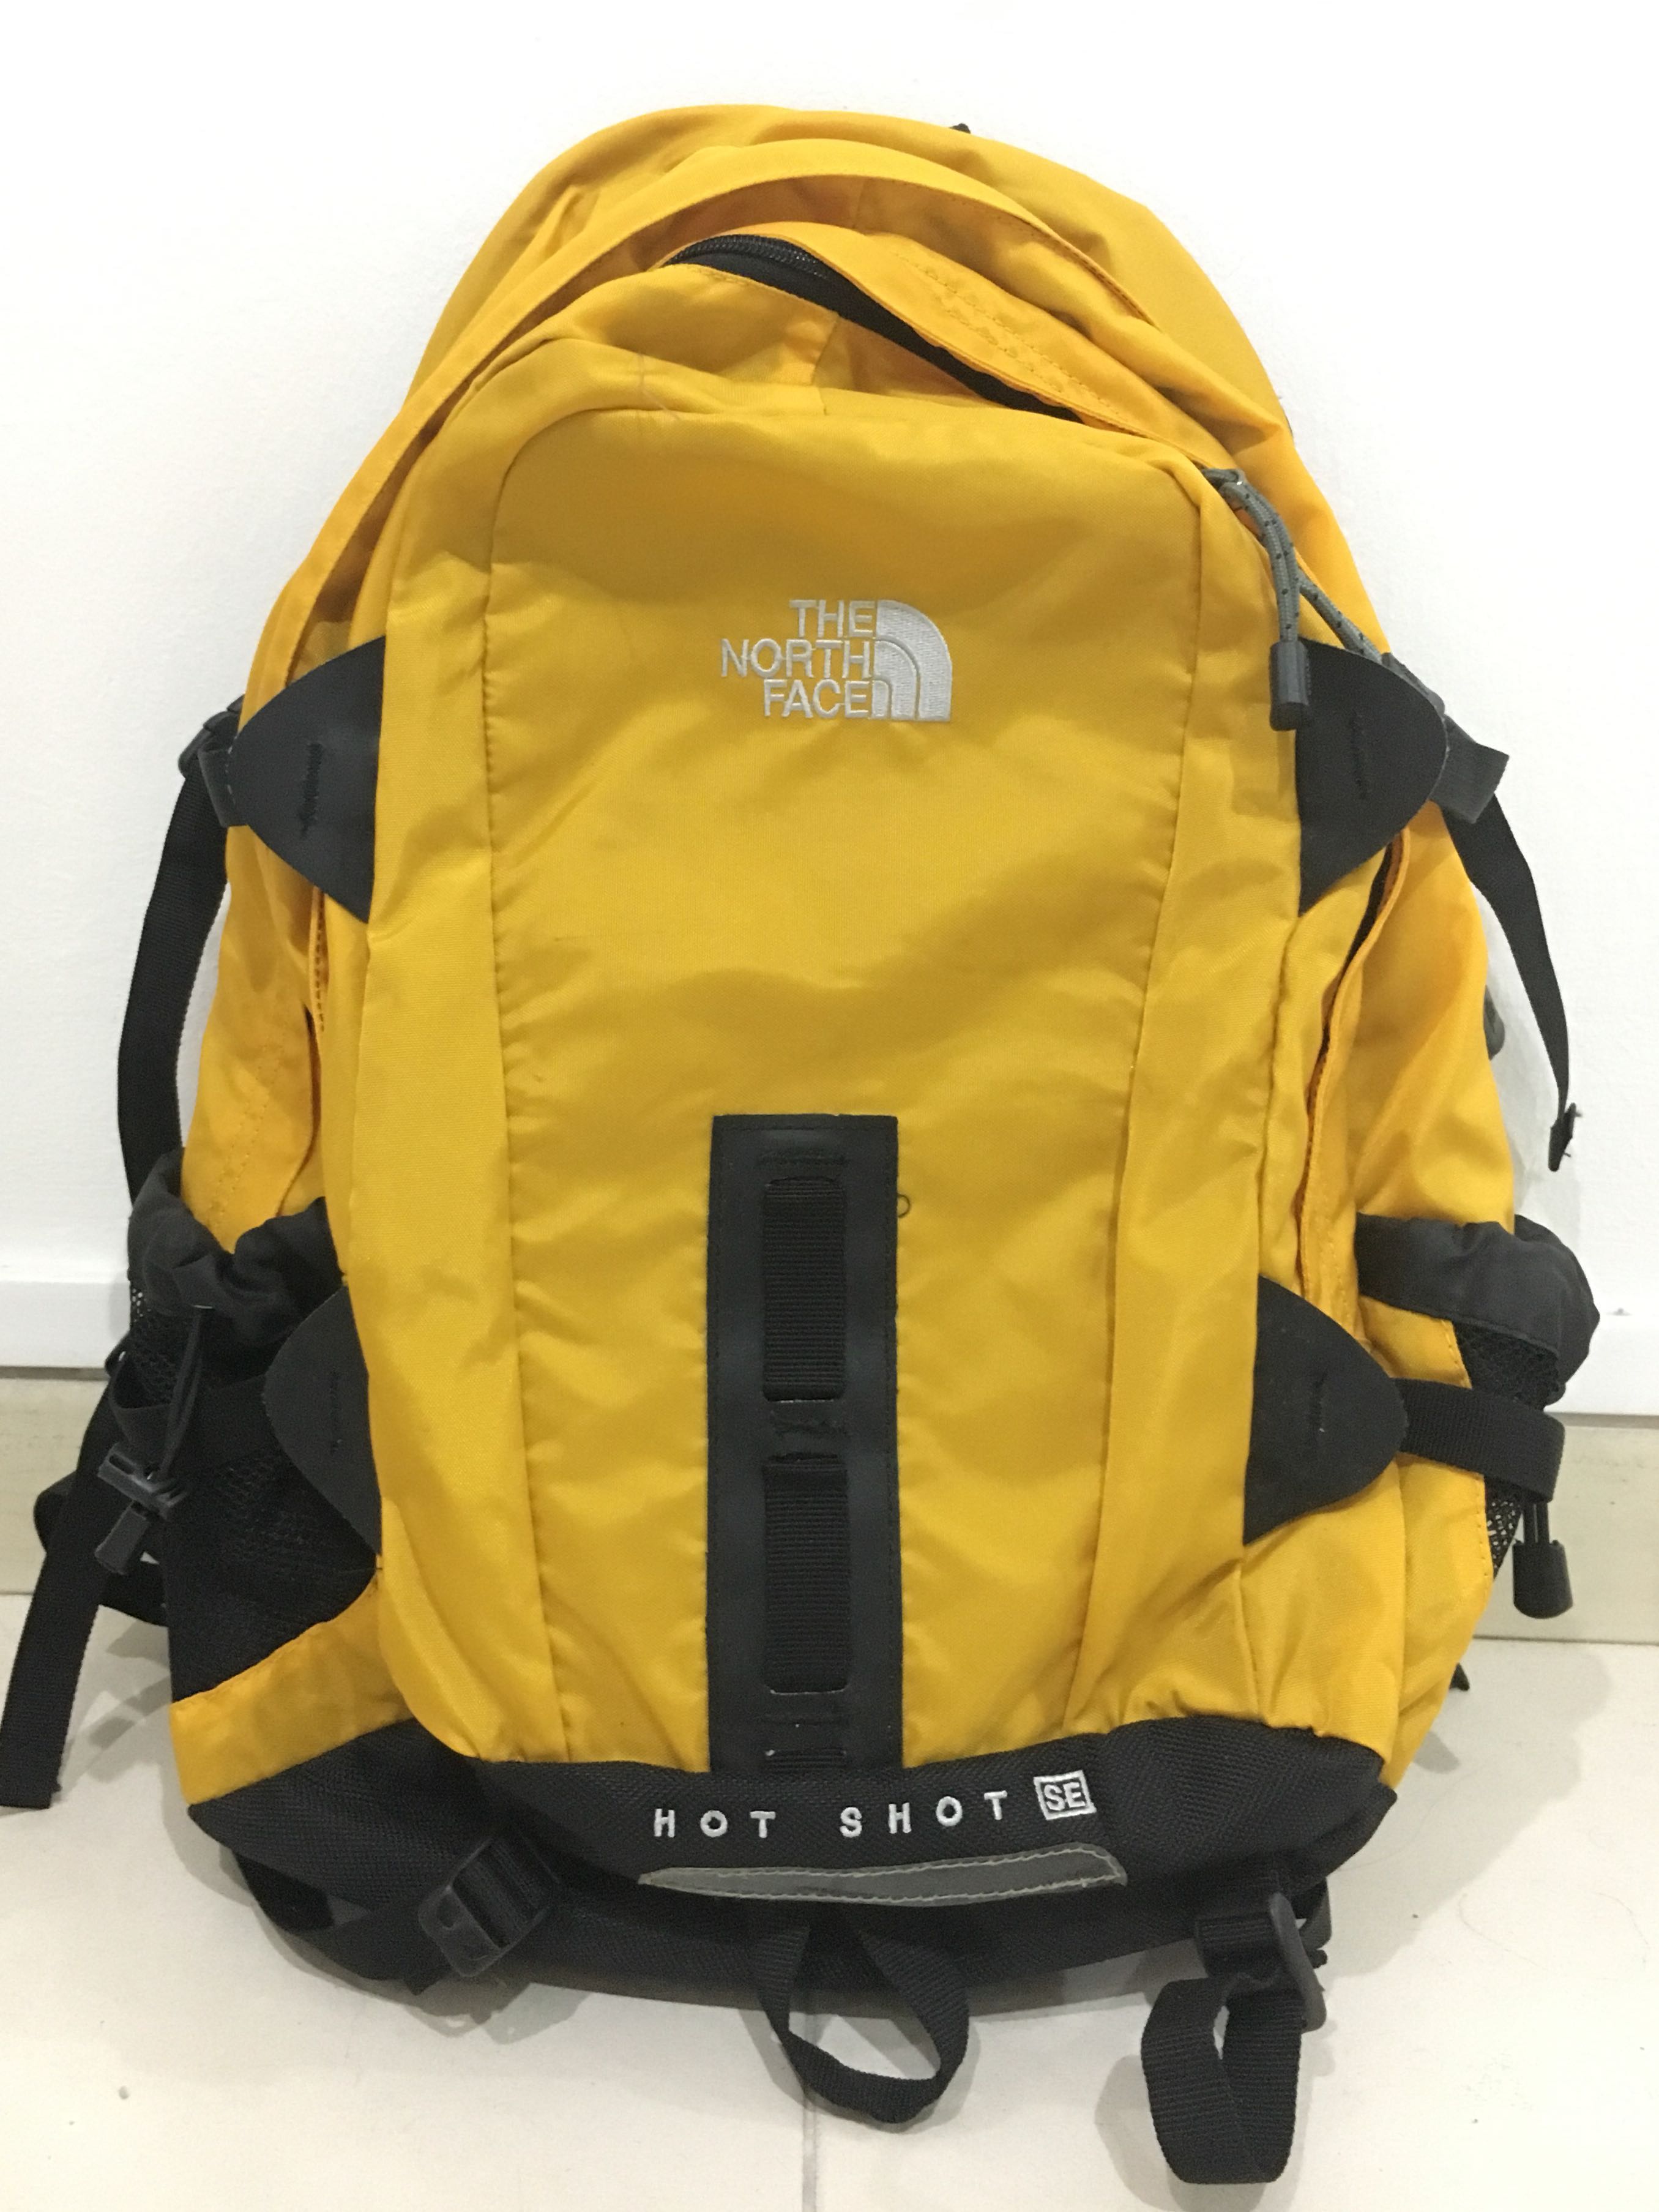 The North Face Backpack Hot Shot Men S Fashion Bags Wallets Briefcases On Carousell